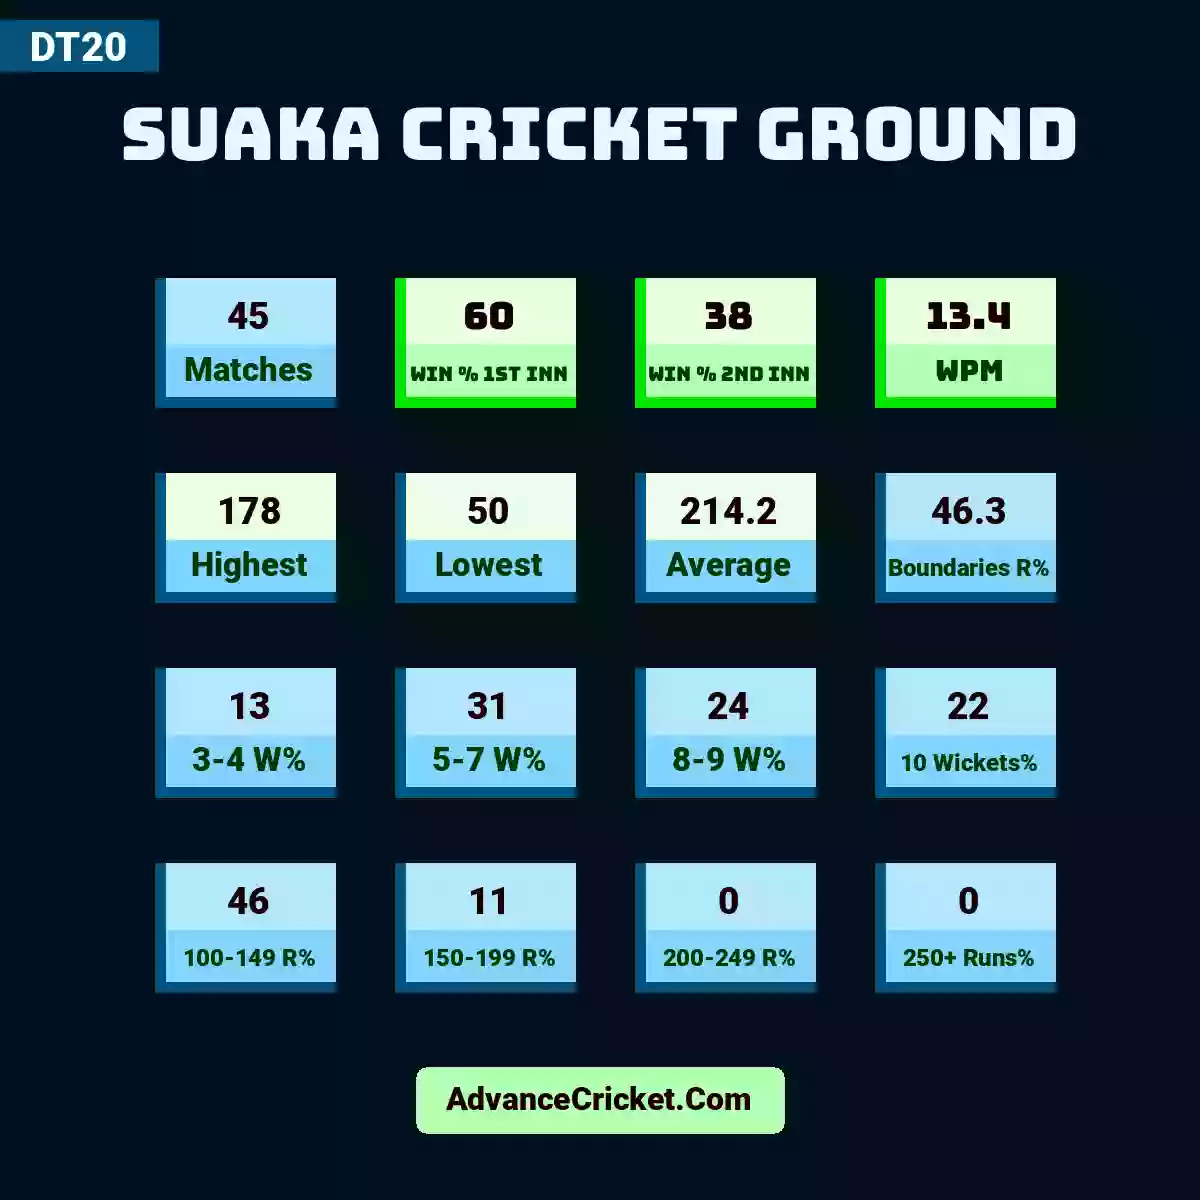 Image showing Suaka Cricket Ground with Matches: 45, Win % 1st Inn: 60, Win % 2nd Inn: 38, WPM: 13.4, Highest: 178, Lowest: 50, Average: 214.2, Boundaries R%: 46.3, 3-4 W%: 13, 5-7 W%: 31, 8-9 W%: 24, 10 Wickets%: 22, 100-149 R%: 46, 150-199 R%: 11, 200-249 R%: 0, 250+ Runs%: 0.